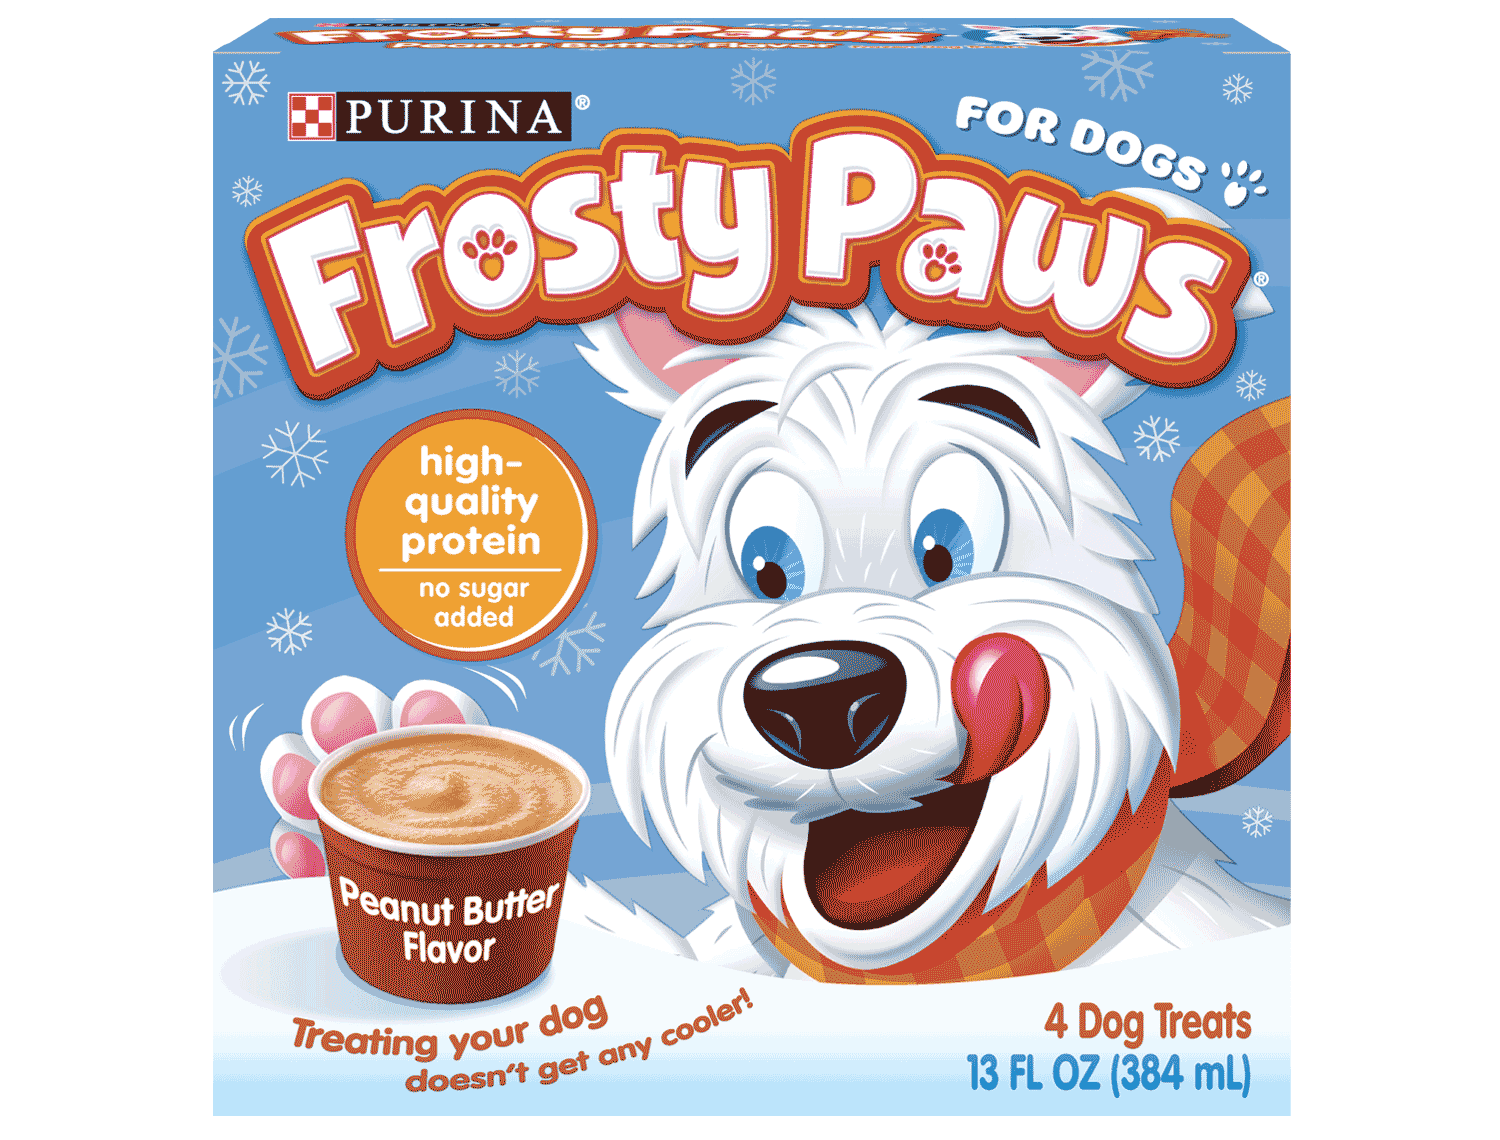 Box of Peanut butter frosty paws ice cream for dogs